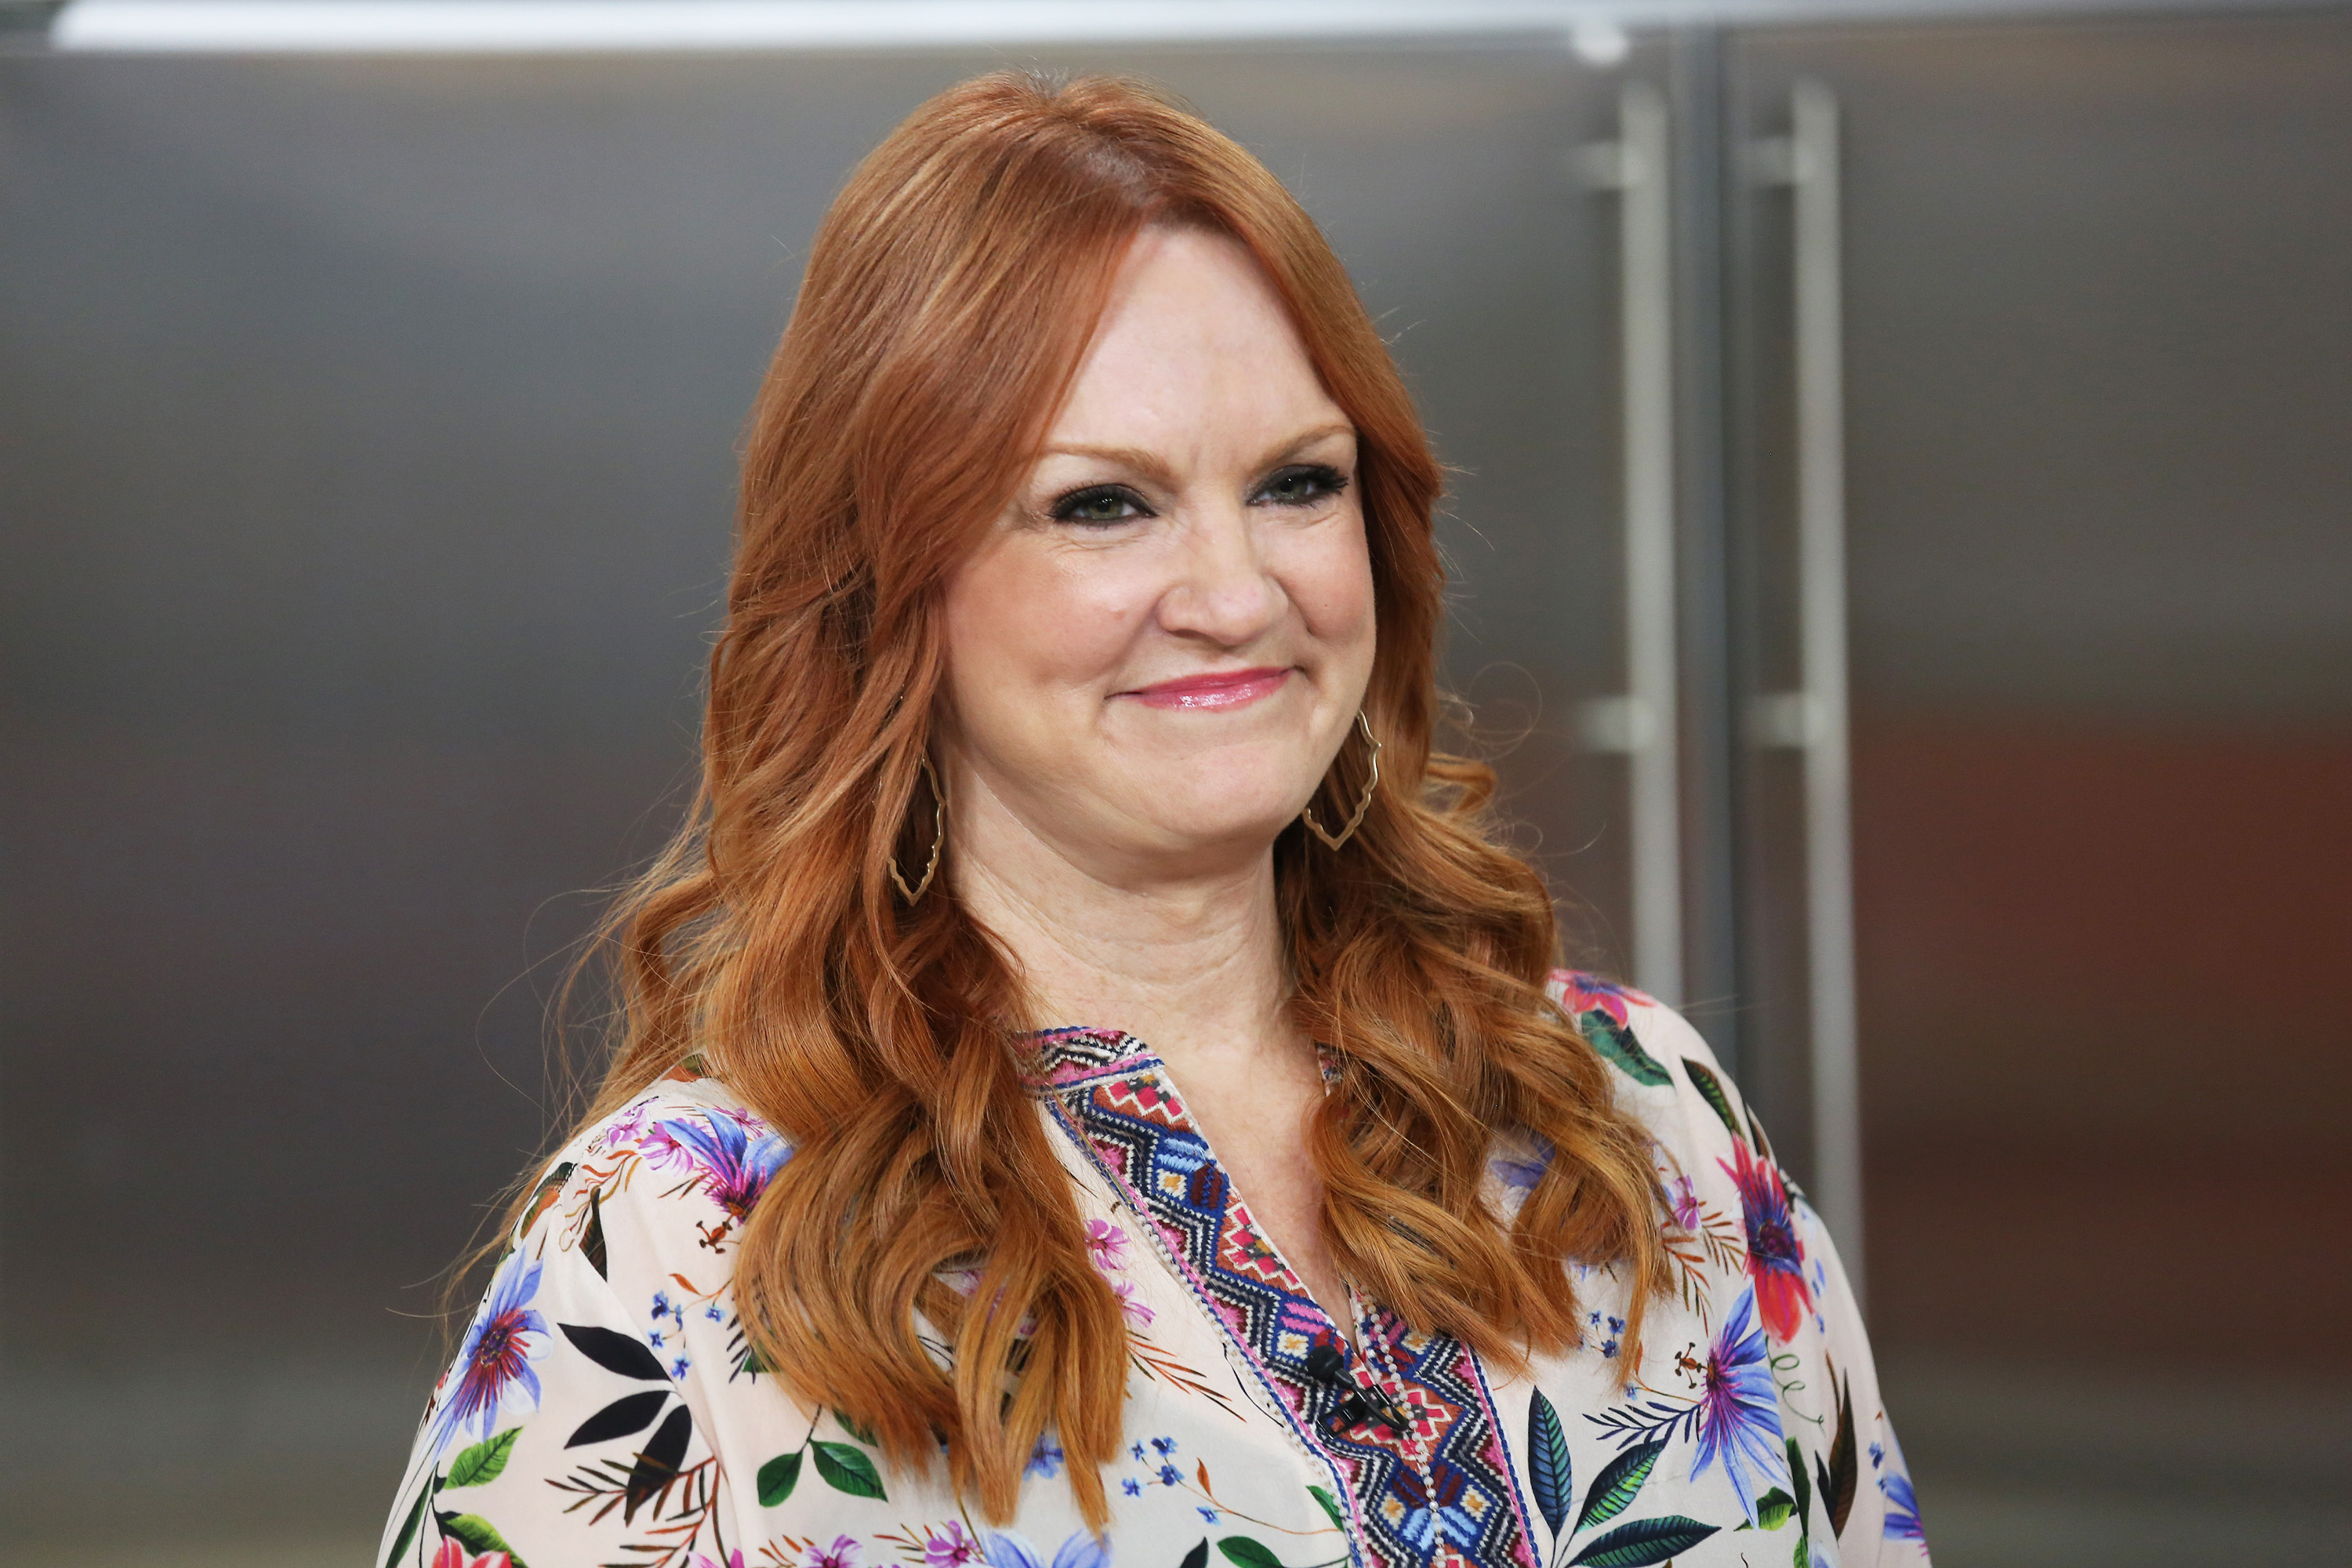 ee Drummond on the 'Today' show | Tyler Essary/NBC/NBCU Photo Bank via Getty Images